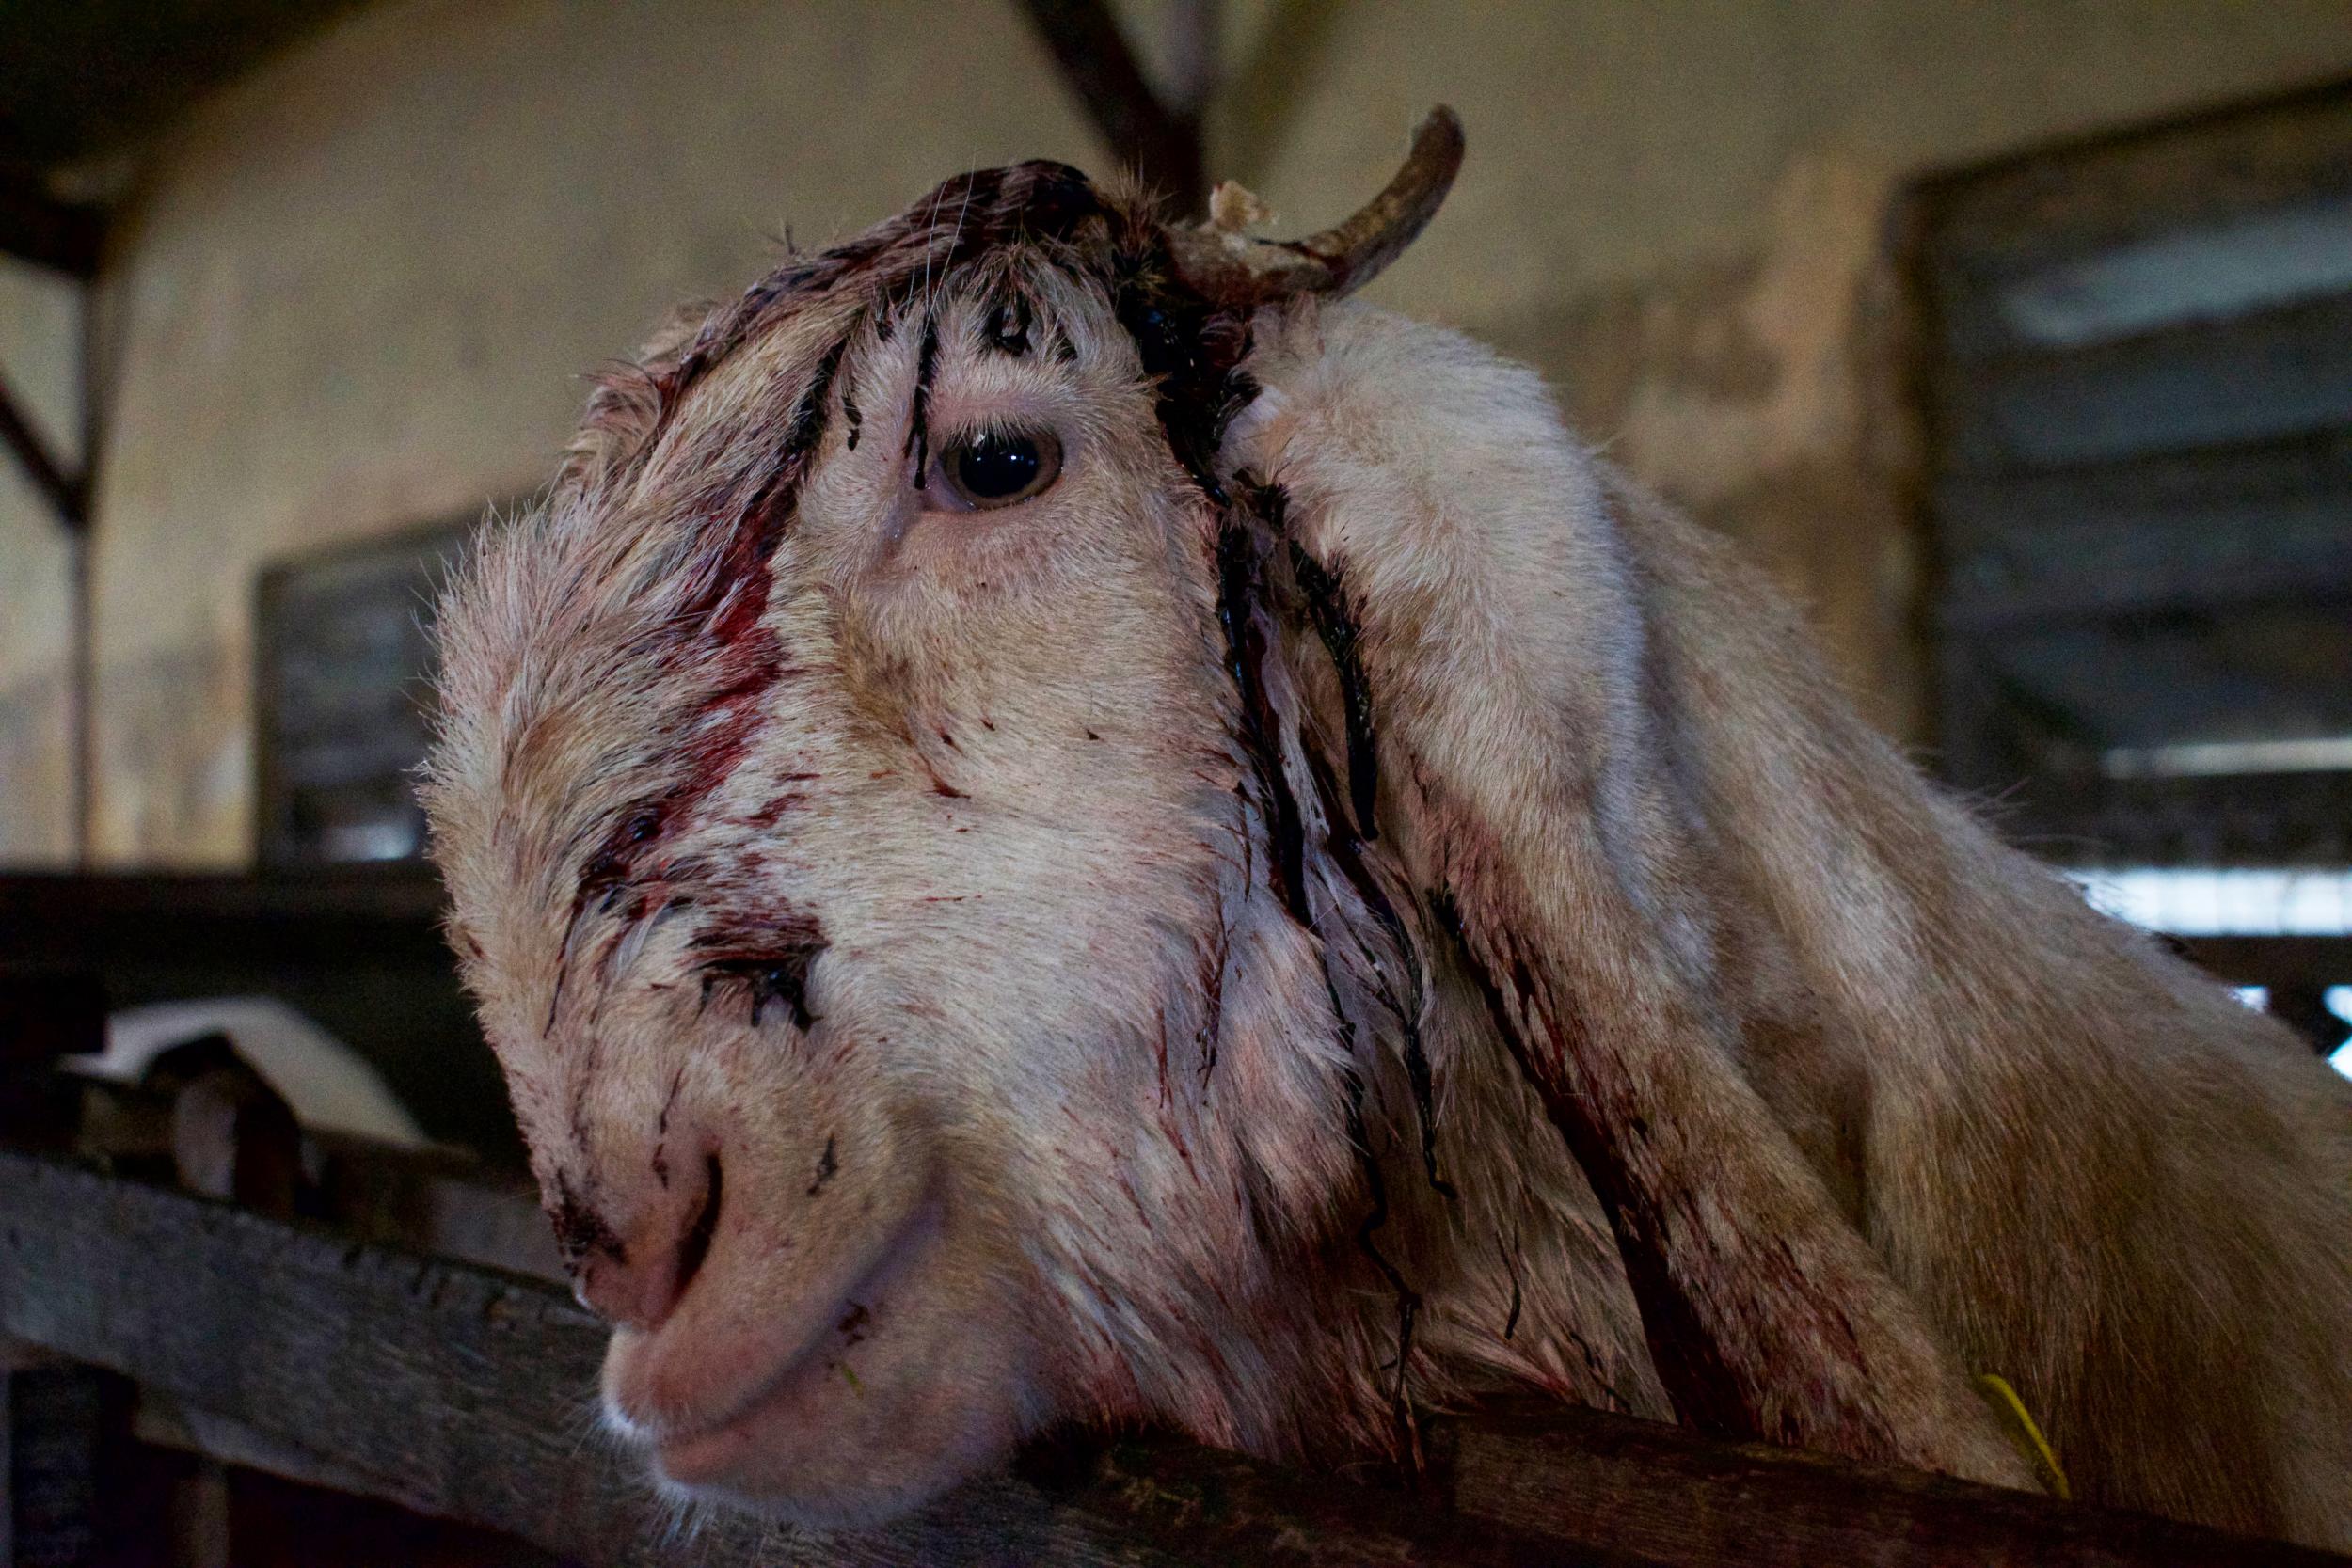 A goat was photographed with a bloody head injury